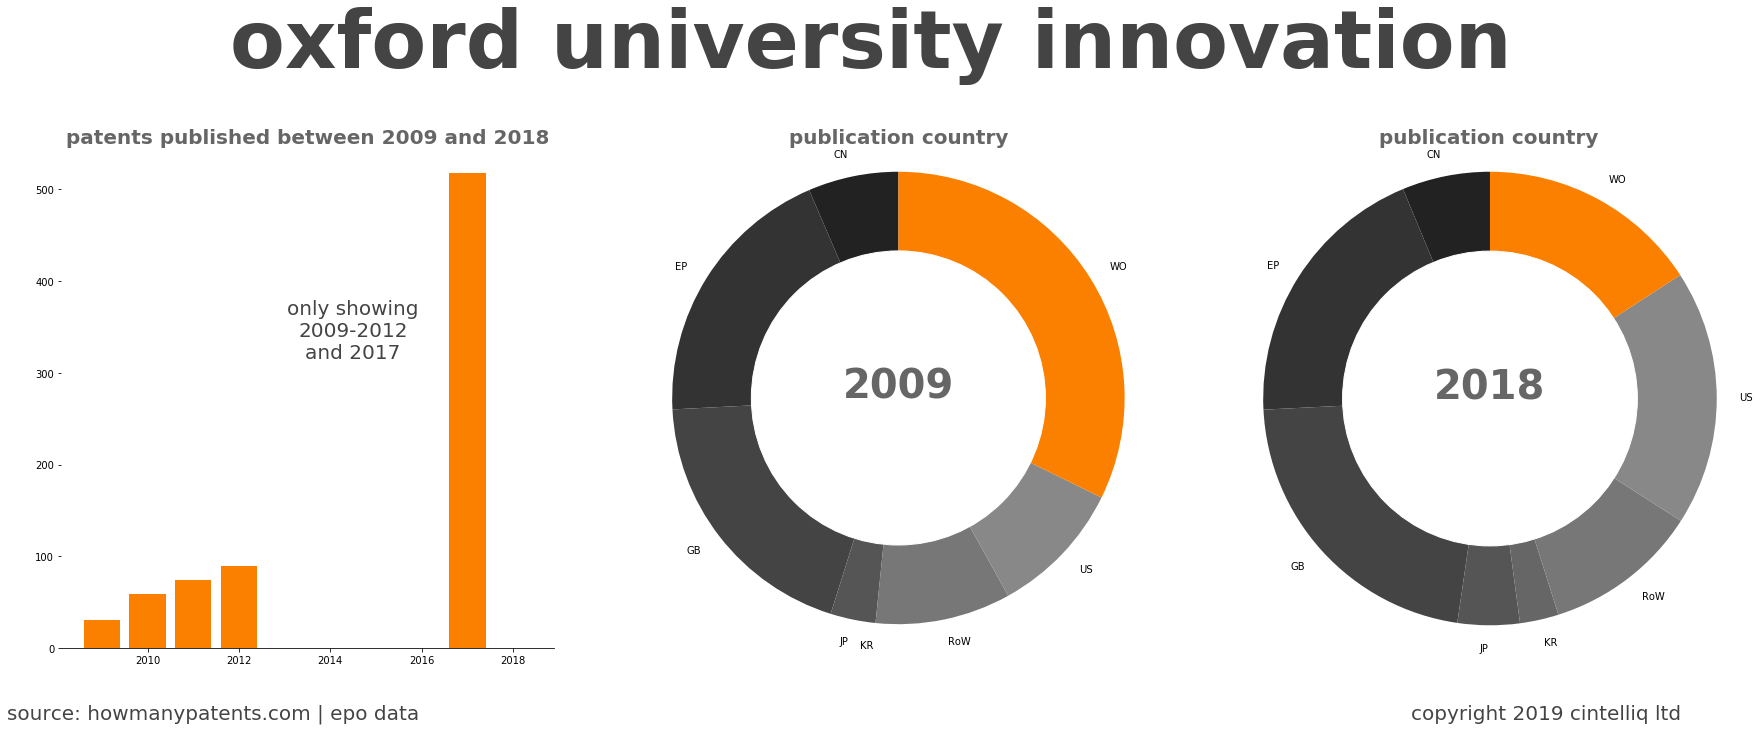 summary of patents for Oxford University Innovation